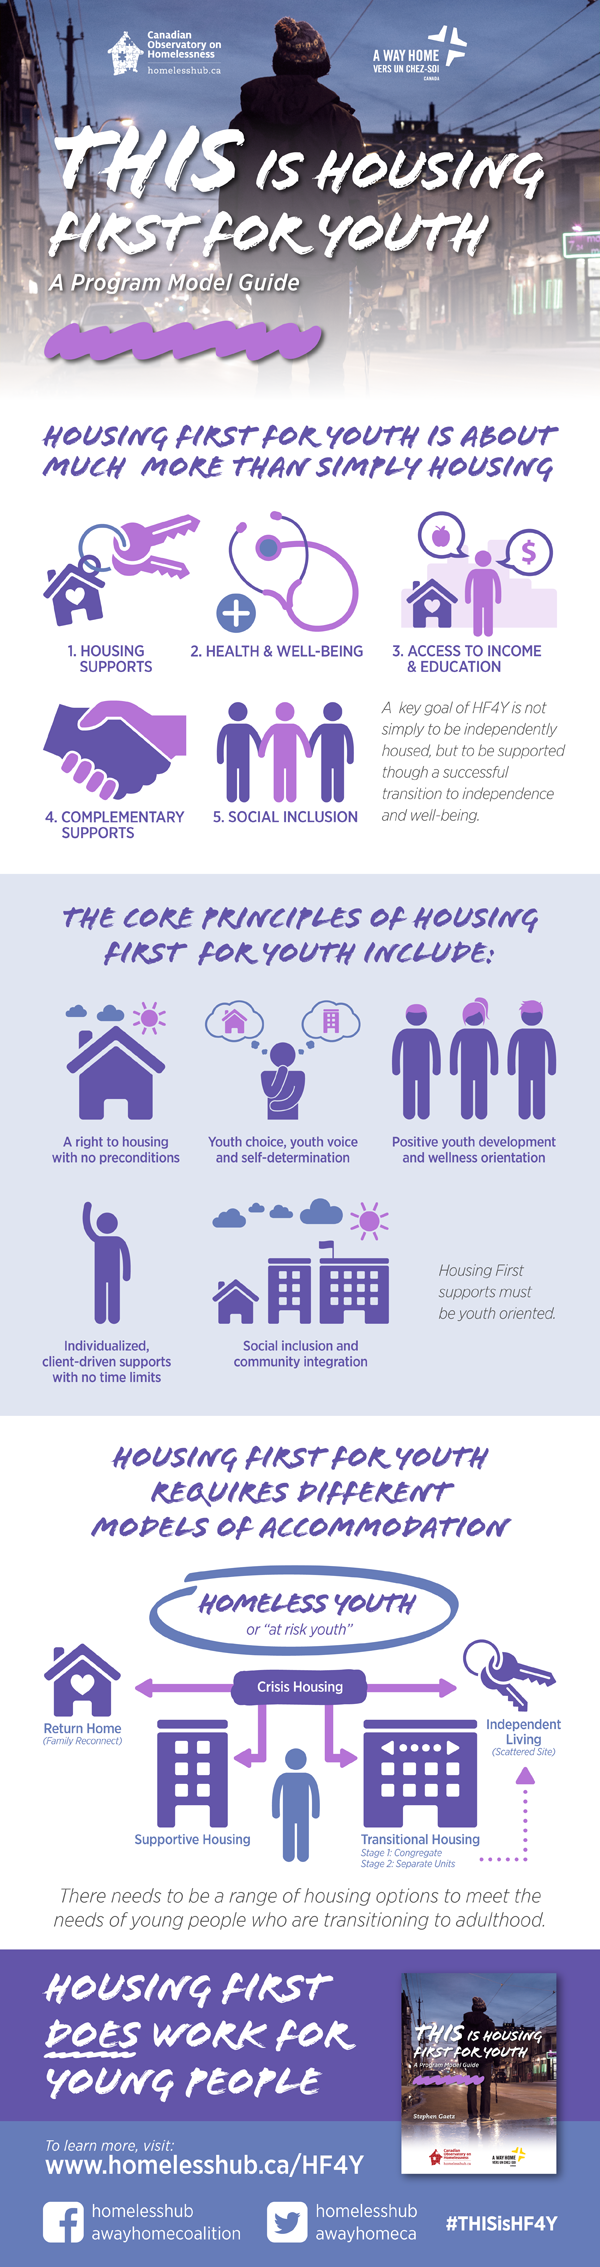 THIS is Housing First for Youth - An infographic summary of the program model guide